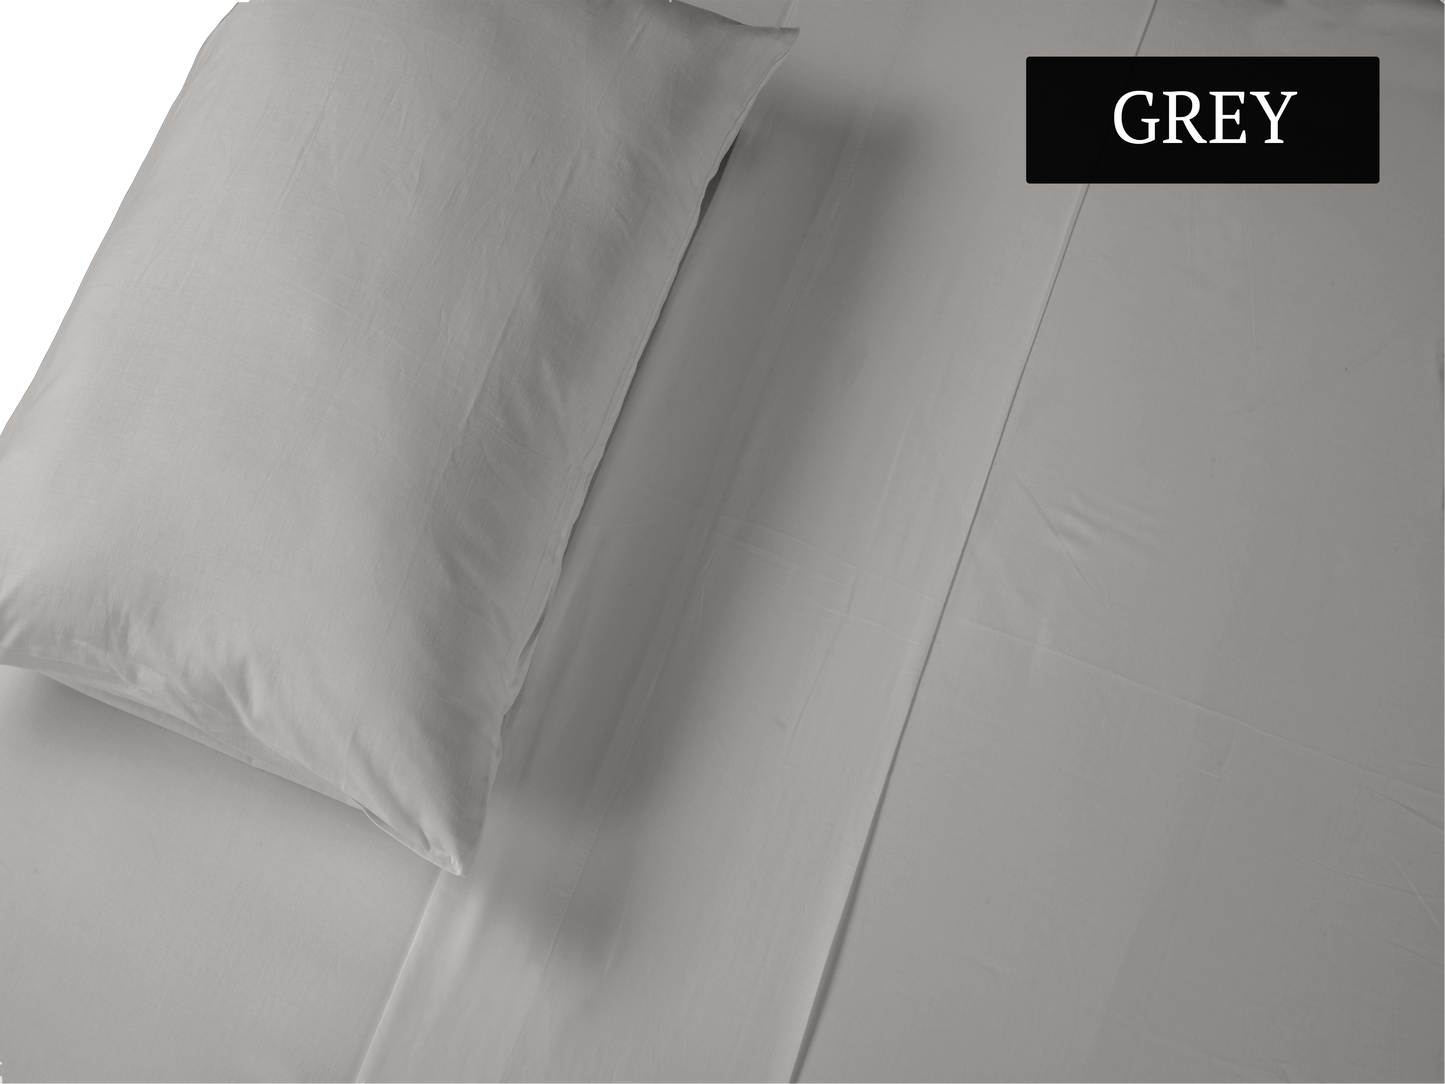 Fitted Sheet Only - 44" x 80" x 6" (White)